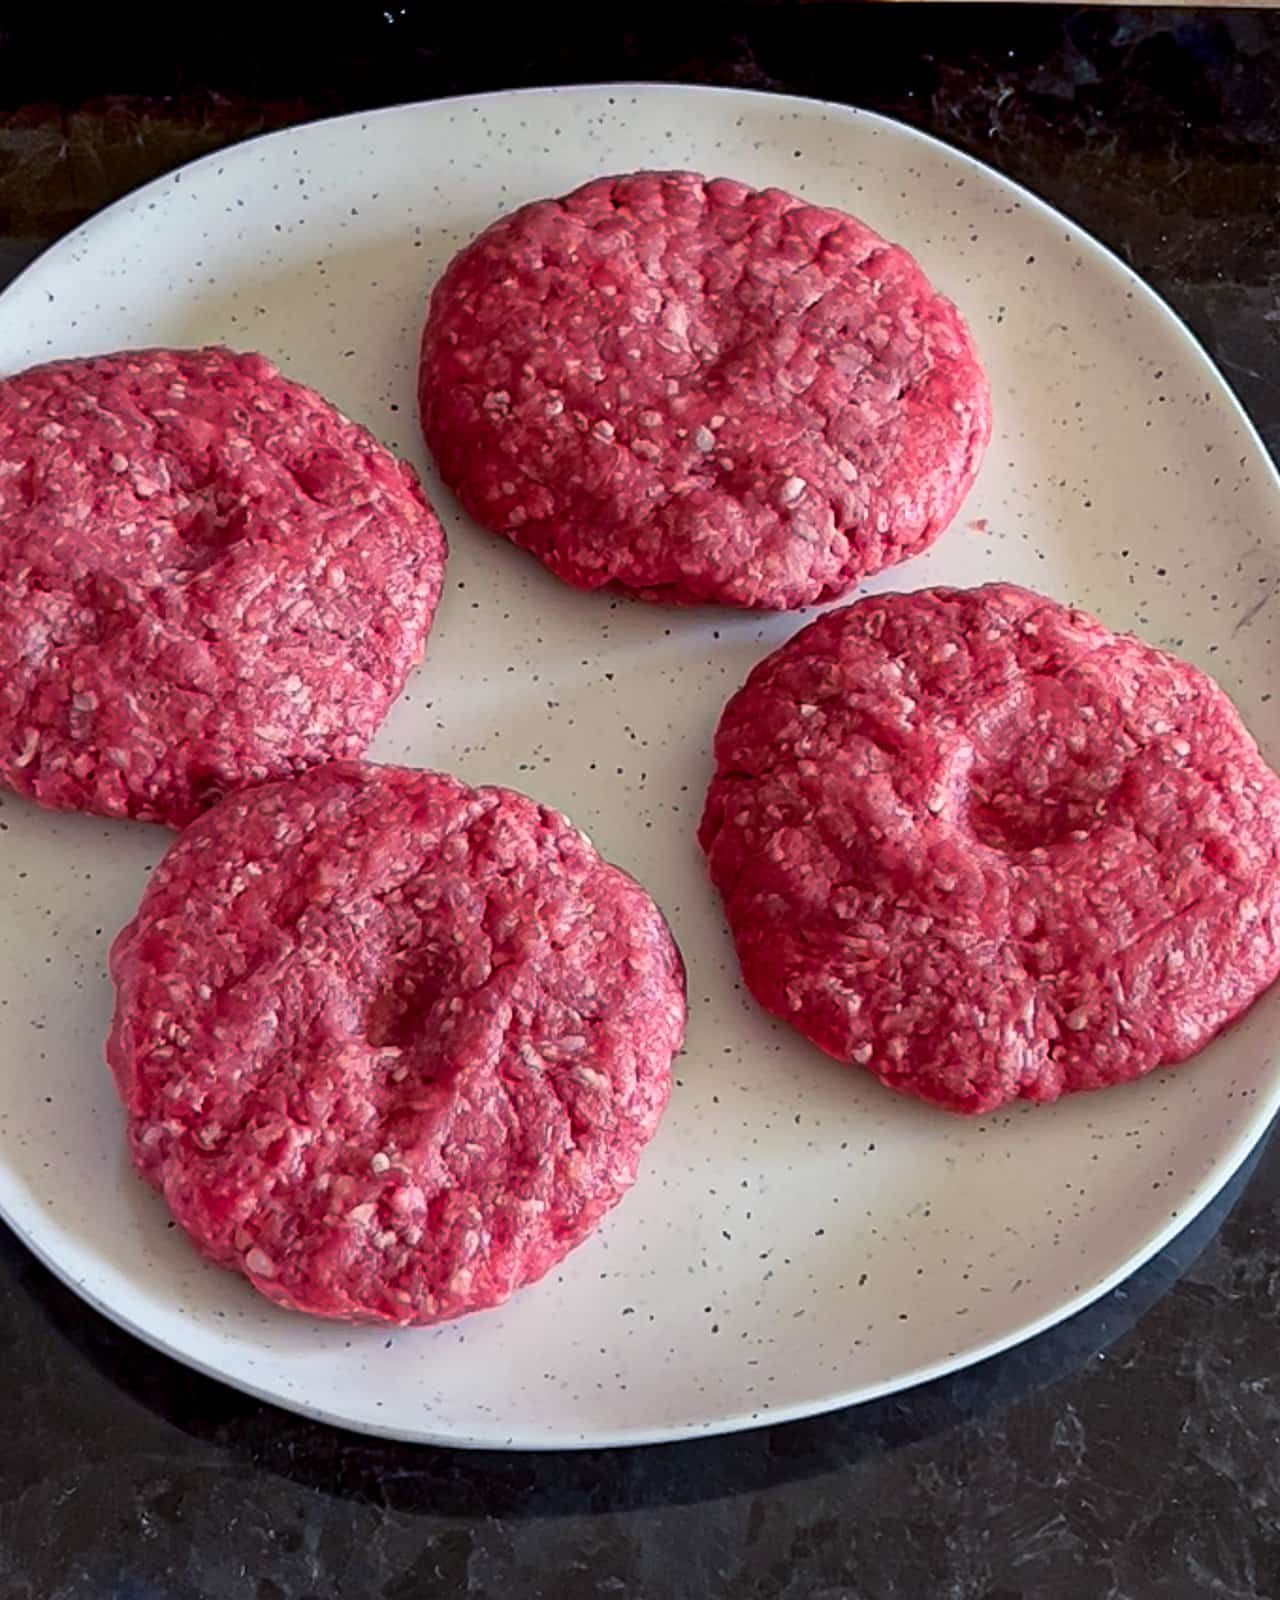 Best burger recipe for patties with hole poked in middle